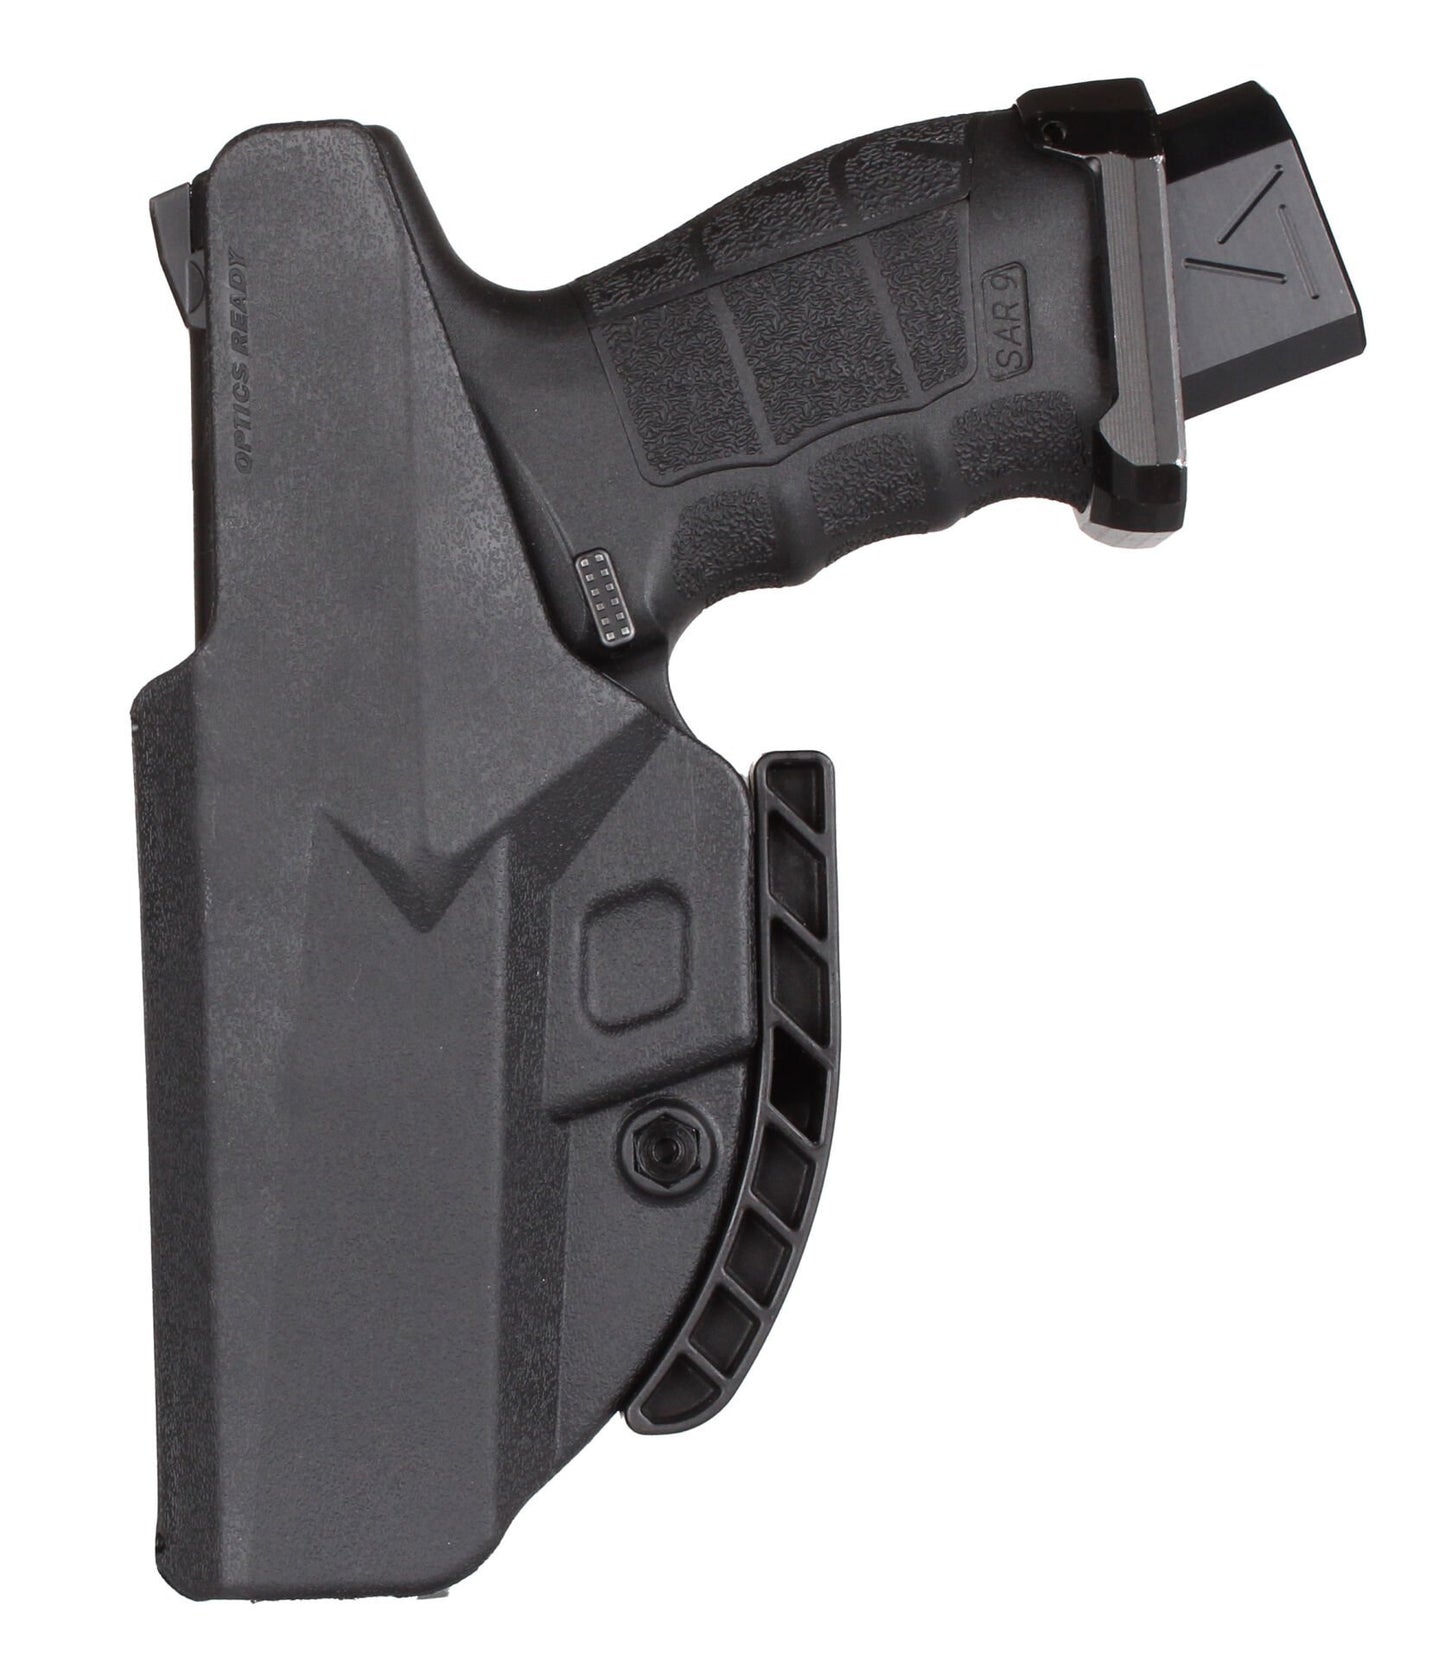 IWB Holster Custom Fit, Optics Ready, Concealment Wing, Adjustable Angle Fork - Compatible with Sarsılmaz SAR9